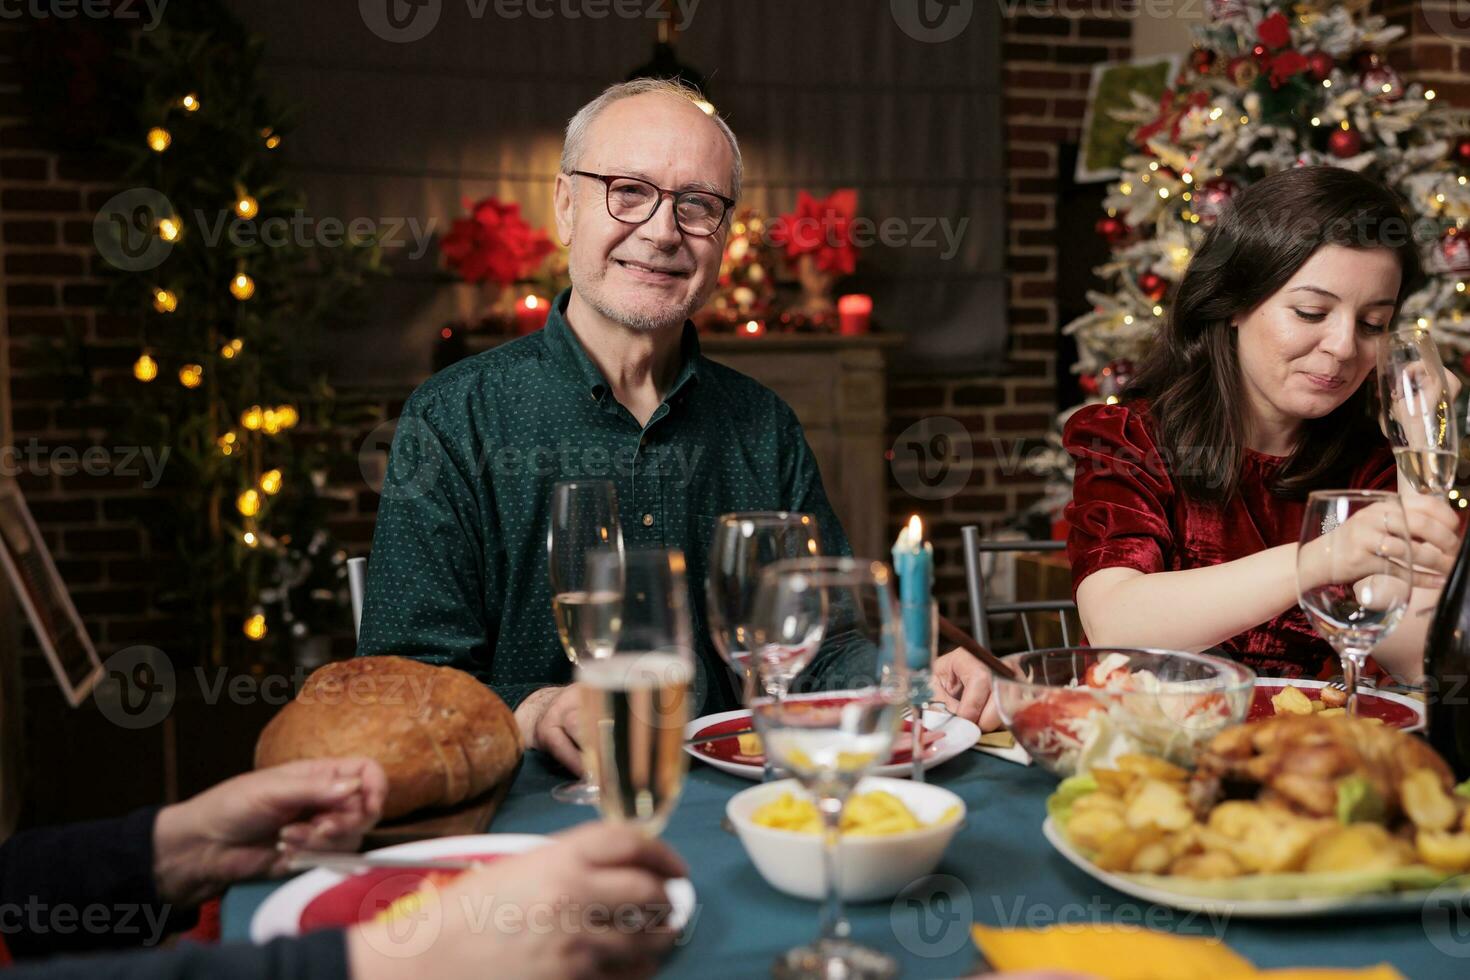 Grandpa at dinner table with family eating traditional meal and celebrating christmas holiday at home. Senior adults meeting together at festive gathering during winter seasonal event. photo